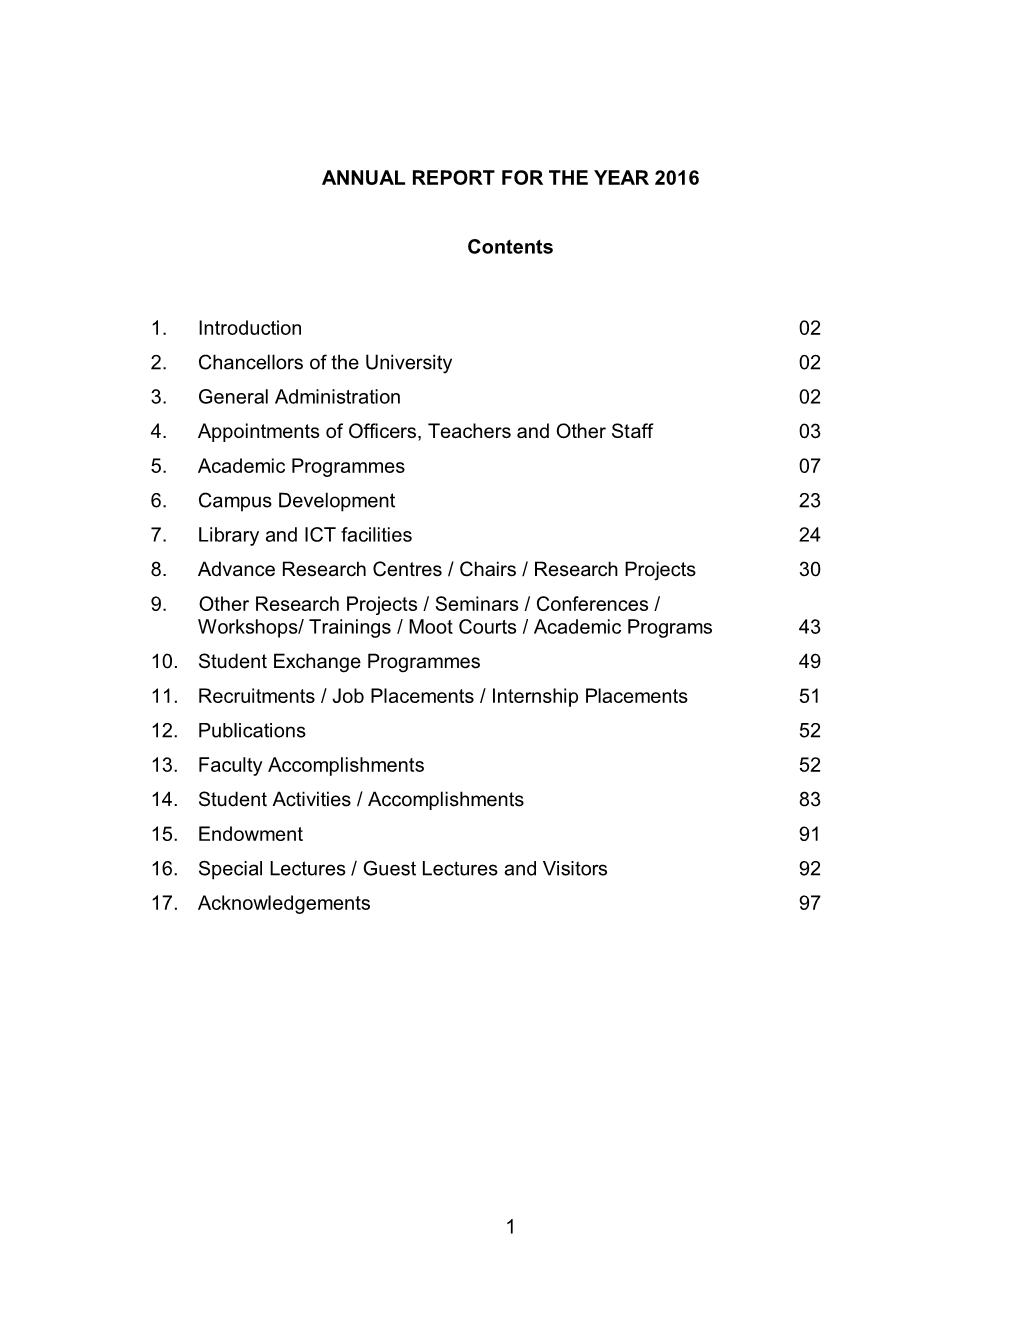 Annual Reports 2016